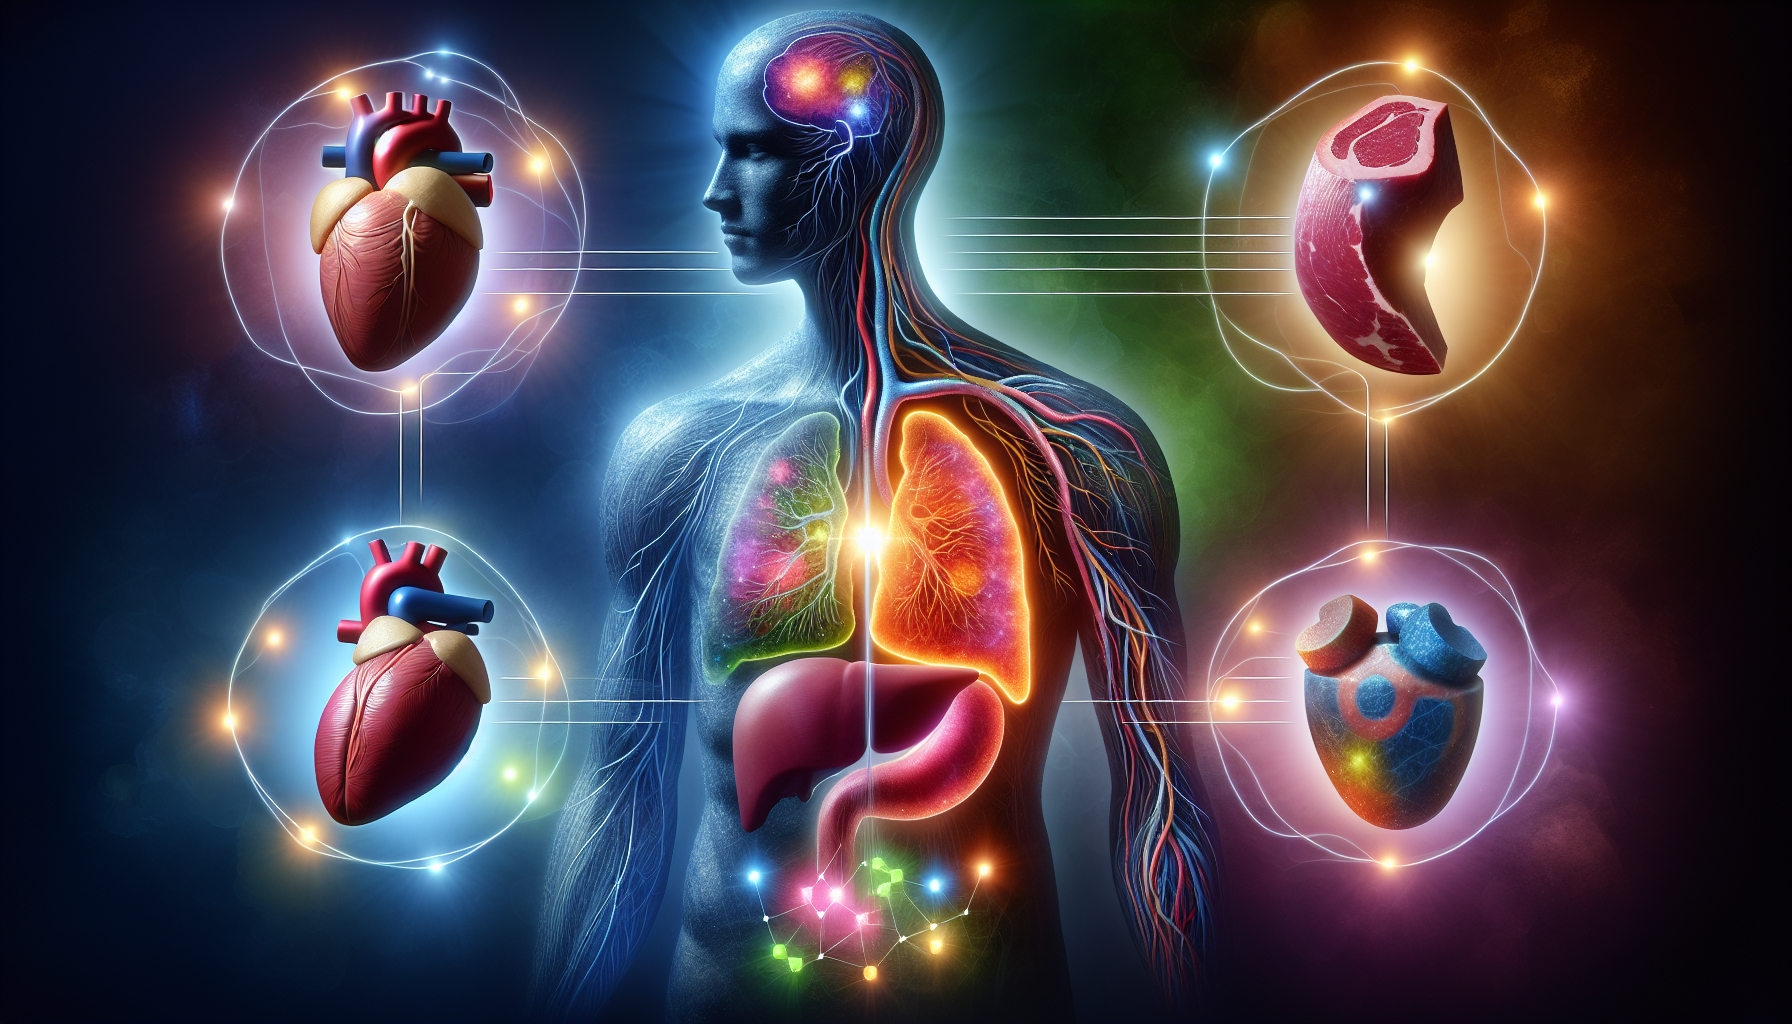 Illustration of synergy between supplements and body organs